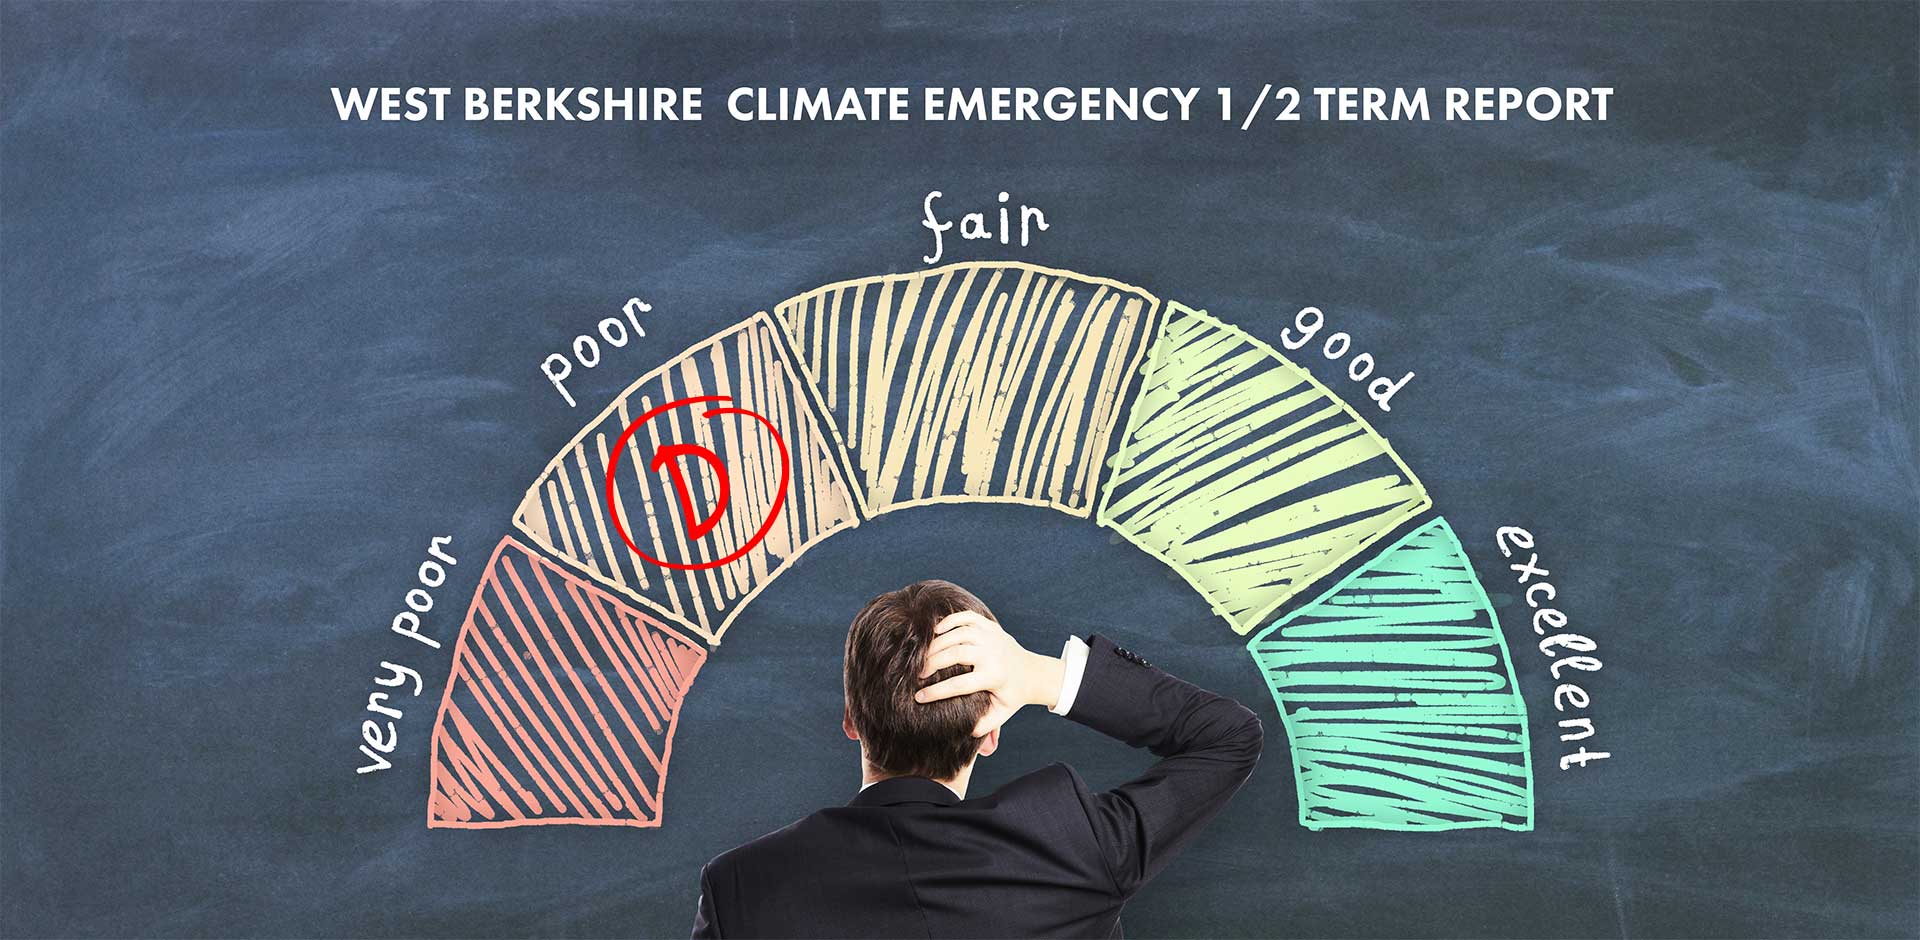 1/2 Term report since the declaration of a climate emergency